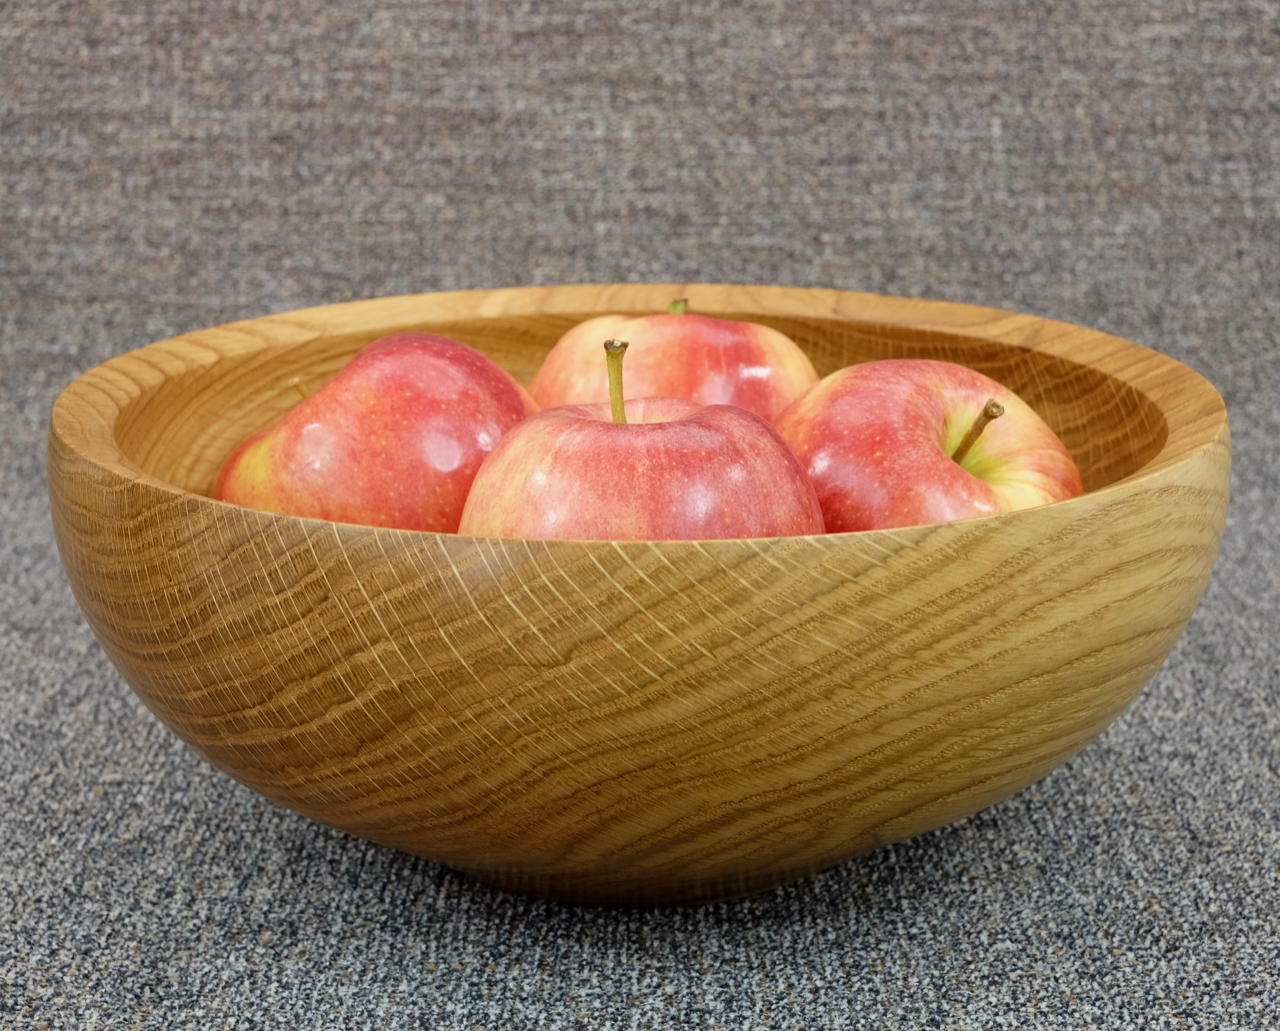 White oak bowl with apples